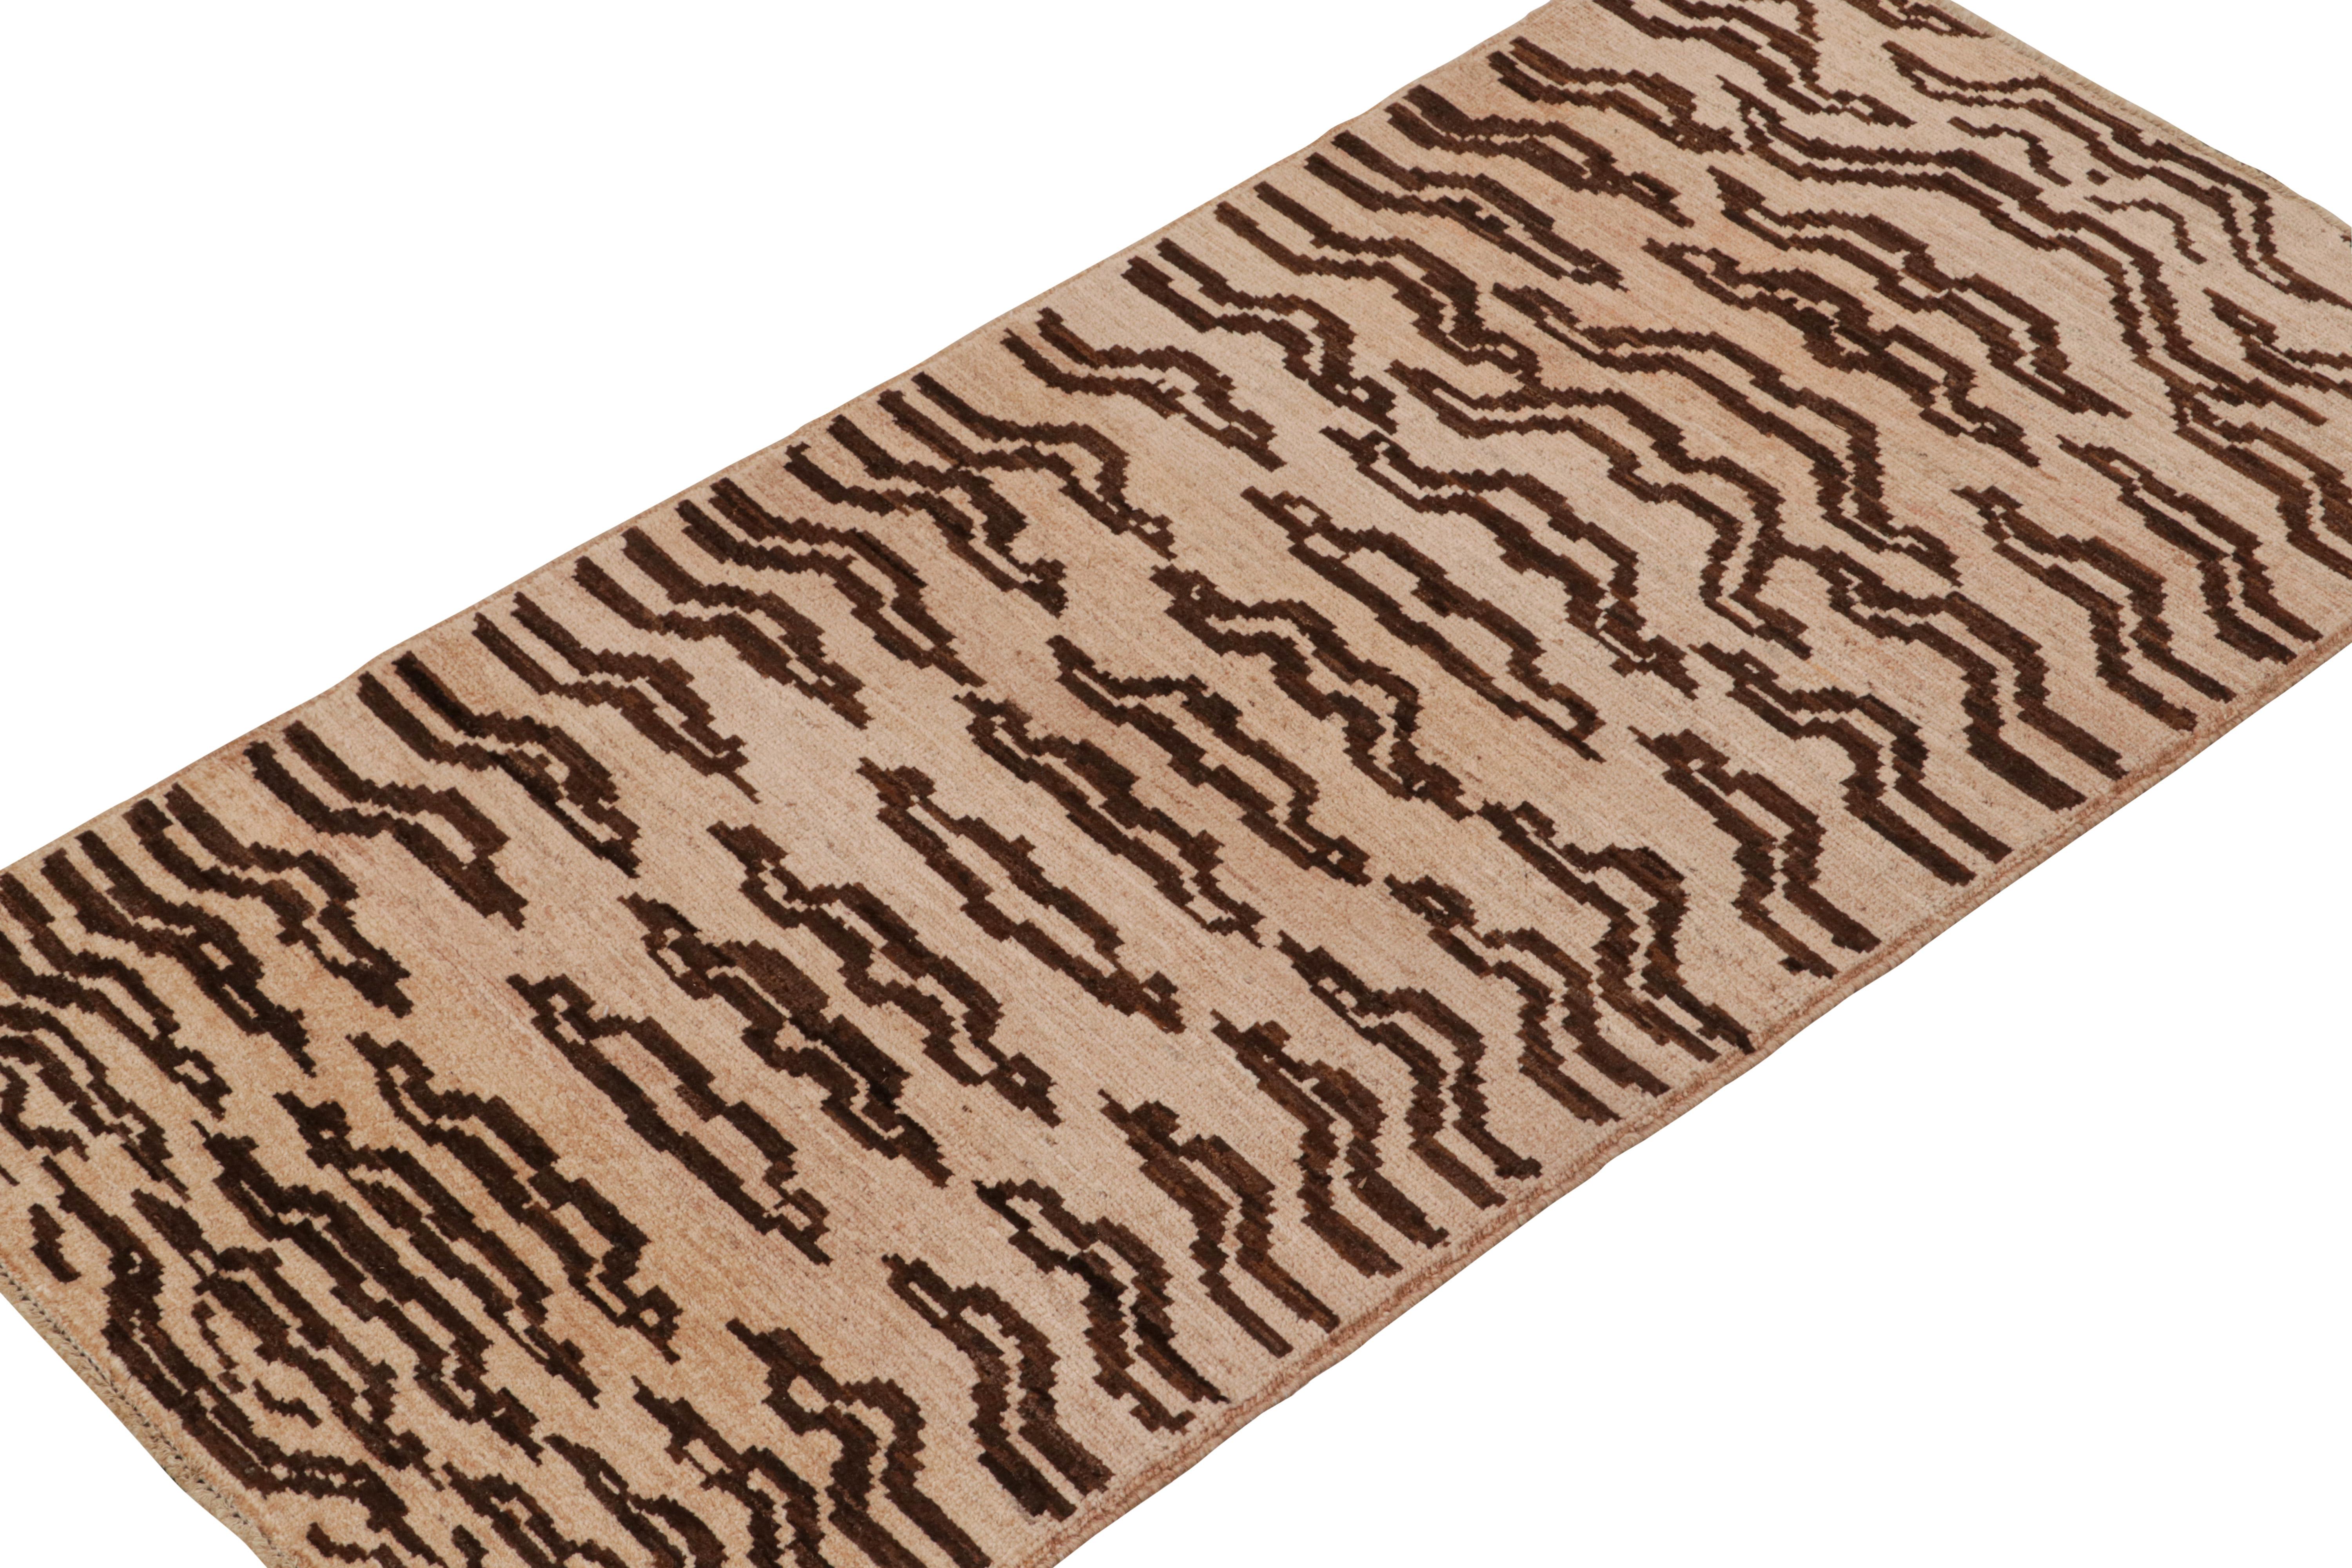 Pakistani Rug & Kilim’s Classic Style Tiger-Skin Runner with Brown Geometric Patterns For Sale